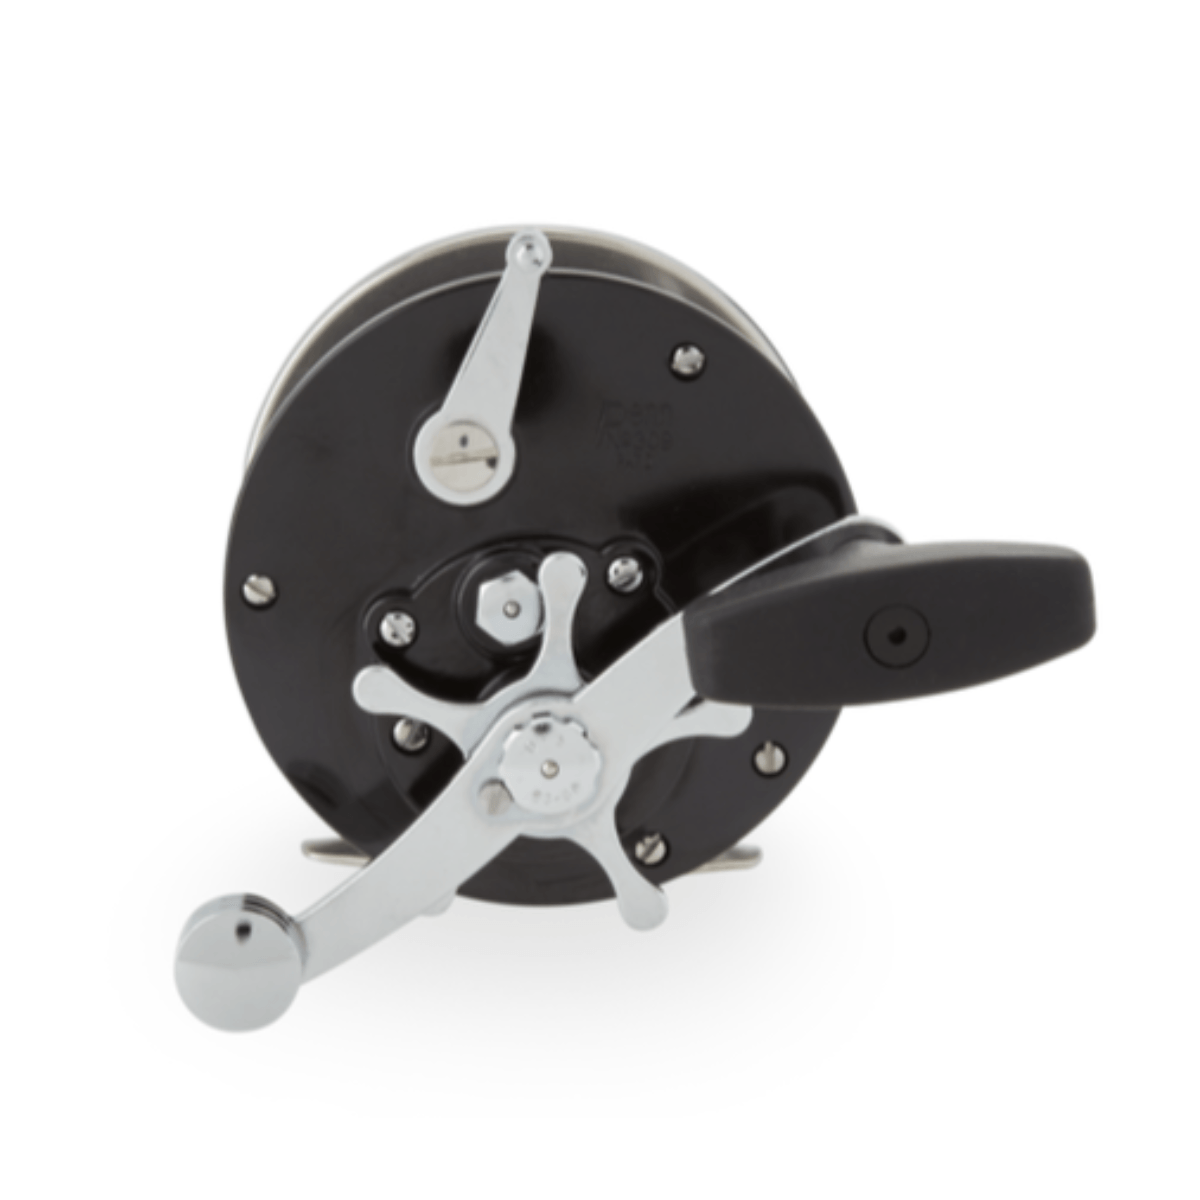 Eagle Claw In-Line Ice Reel